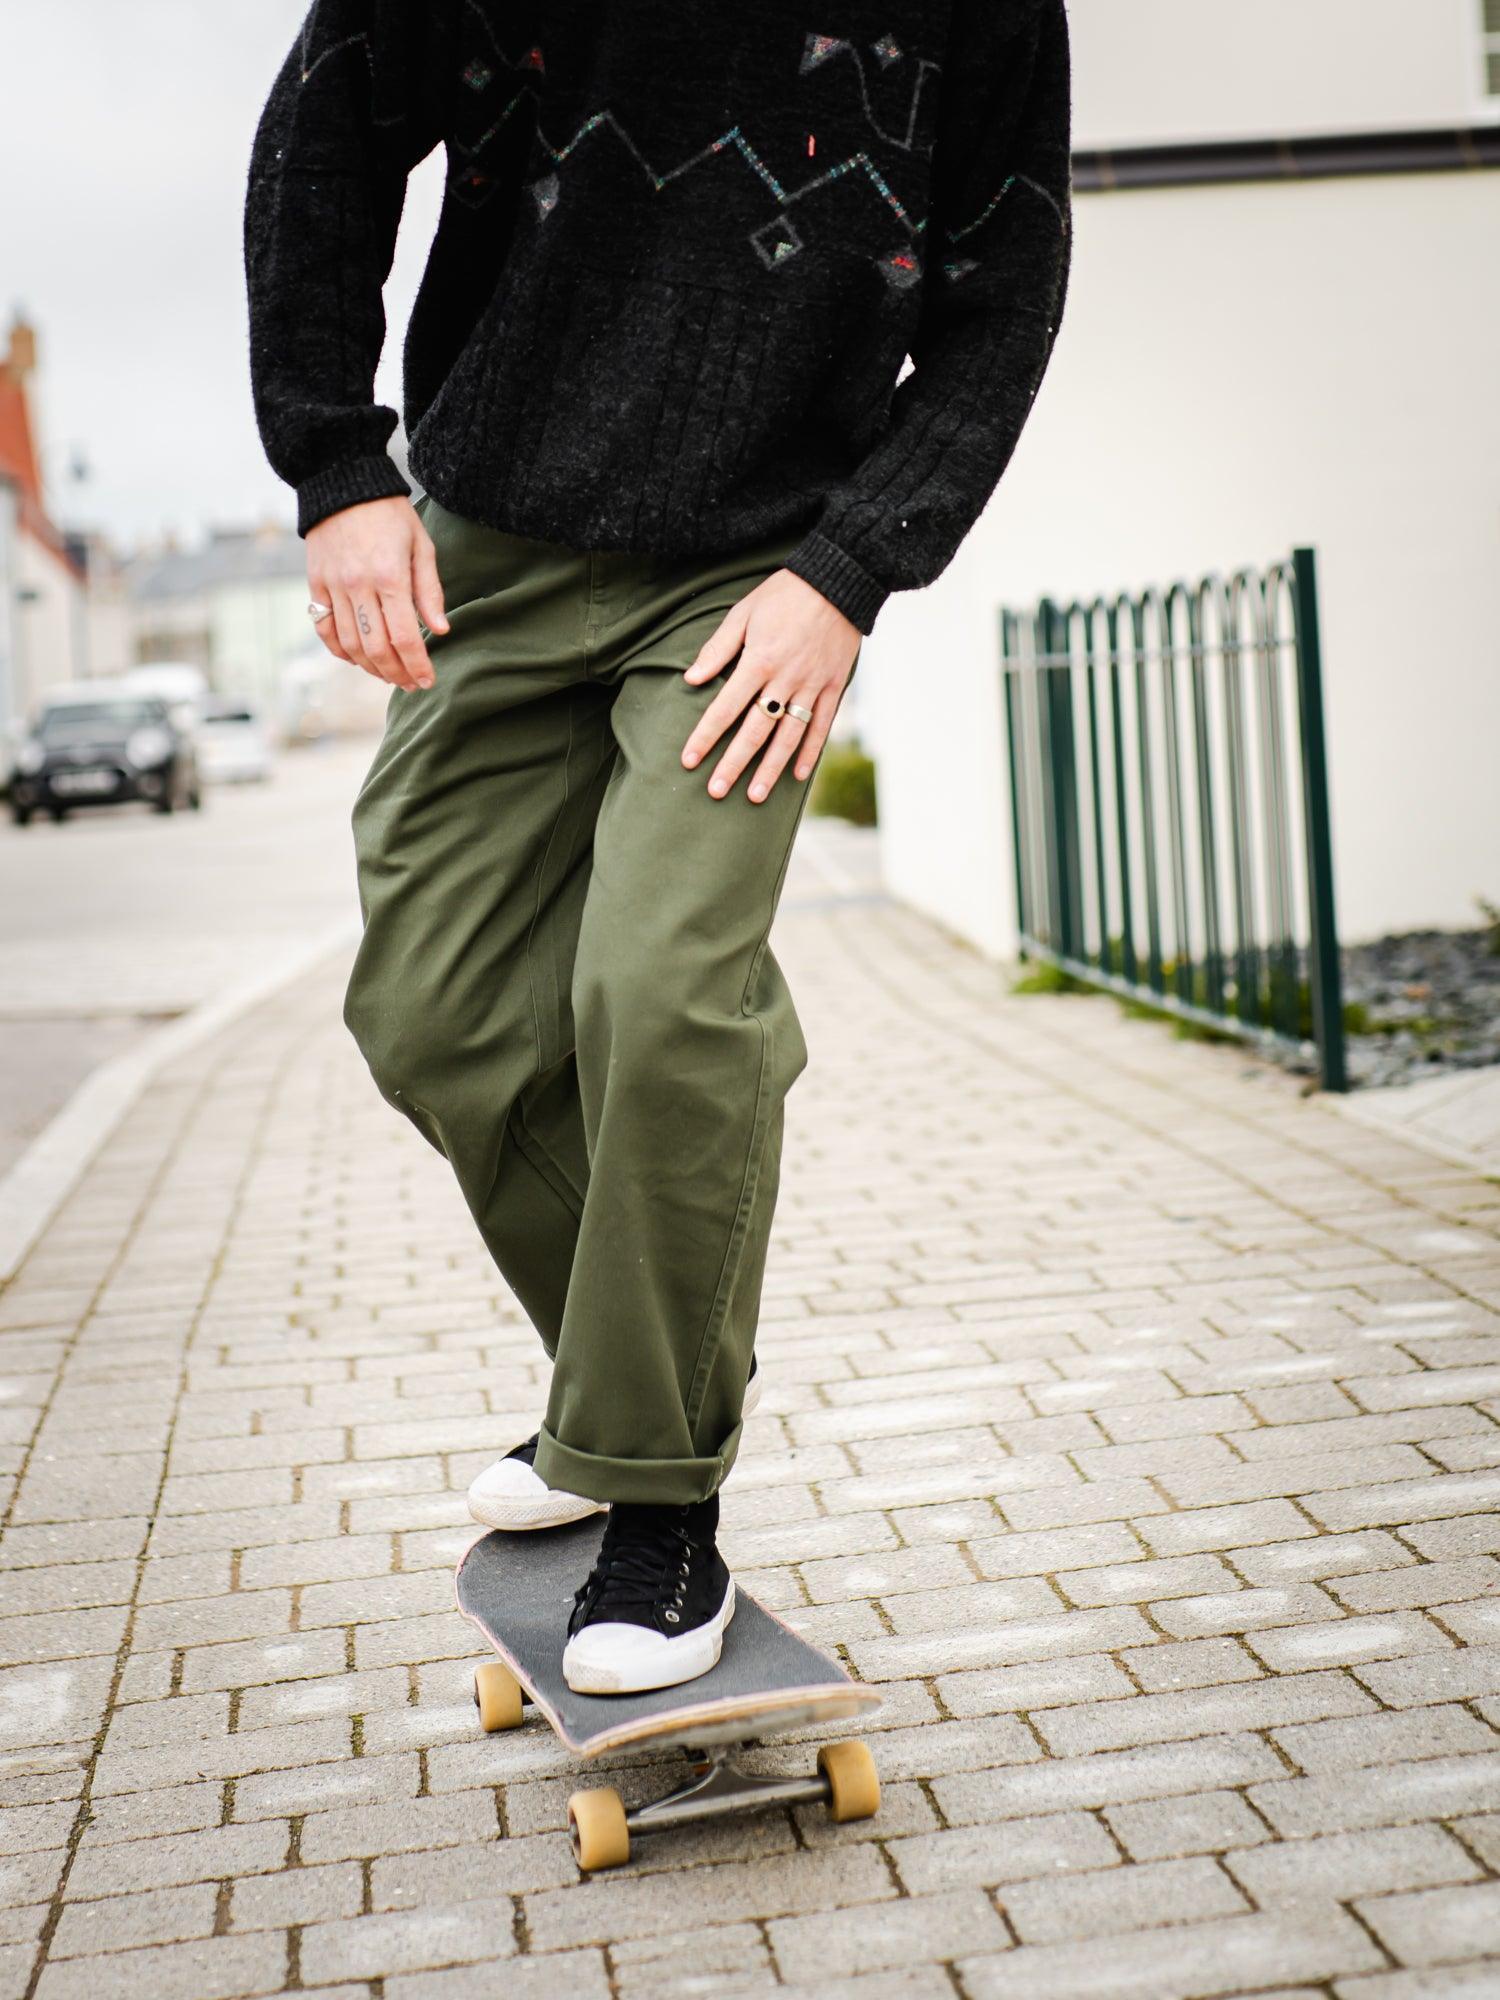 Watershed Brand Standard Issue Trousers - Olive